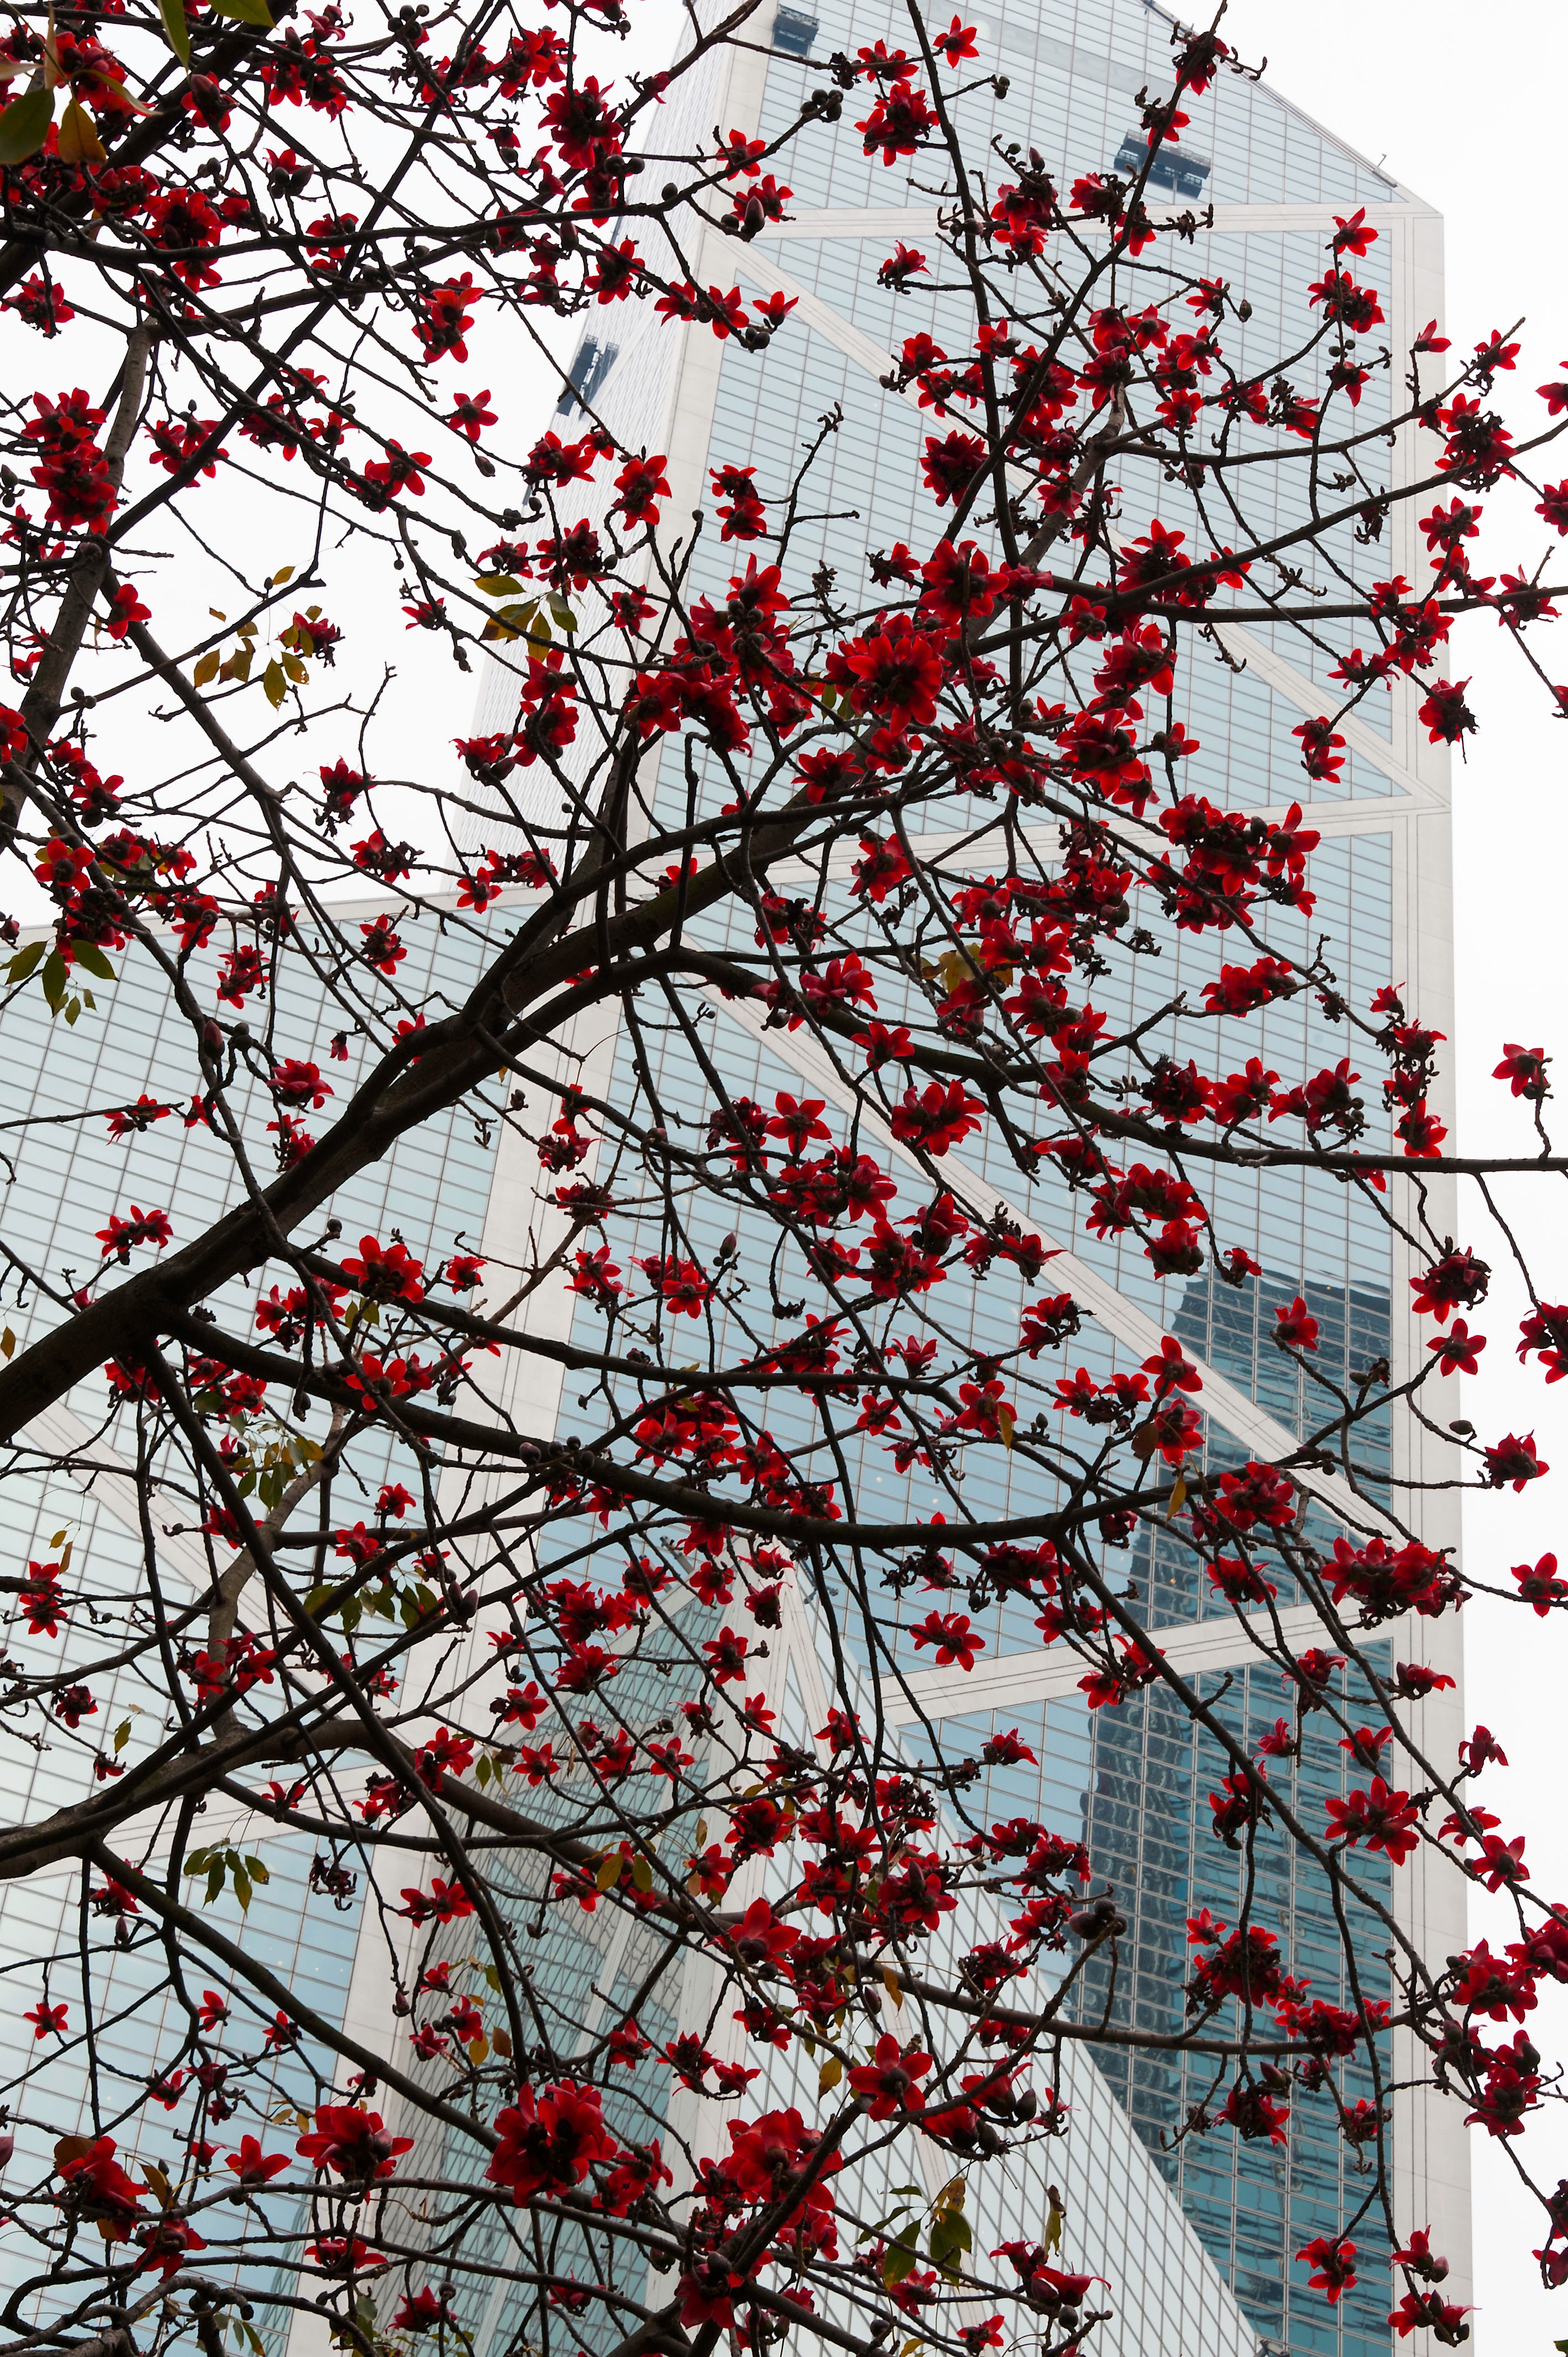 Cotton trees in full bloom in Central. Photo: Alamy